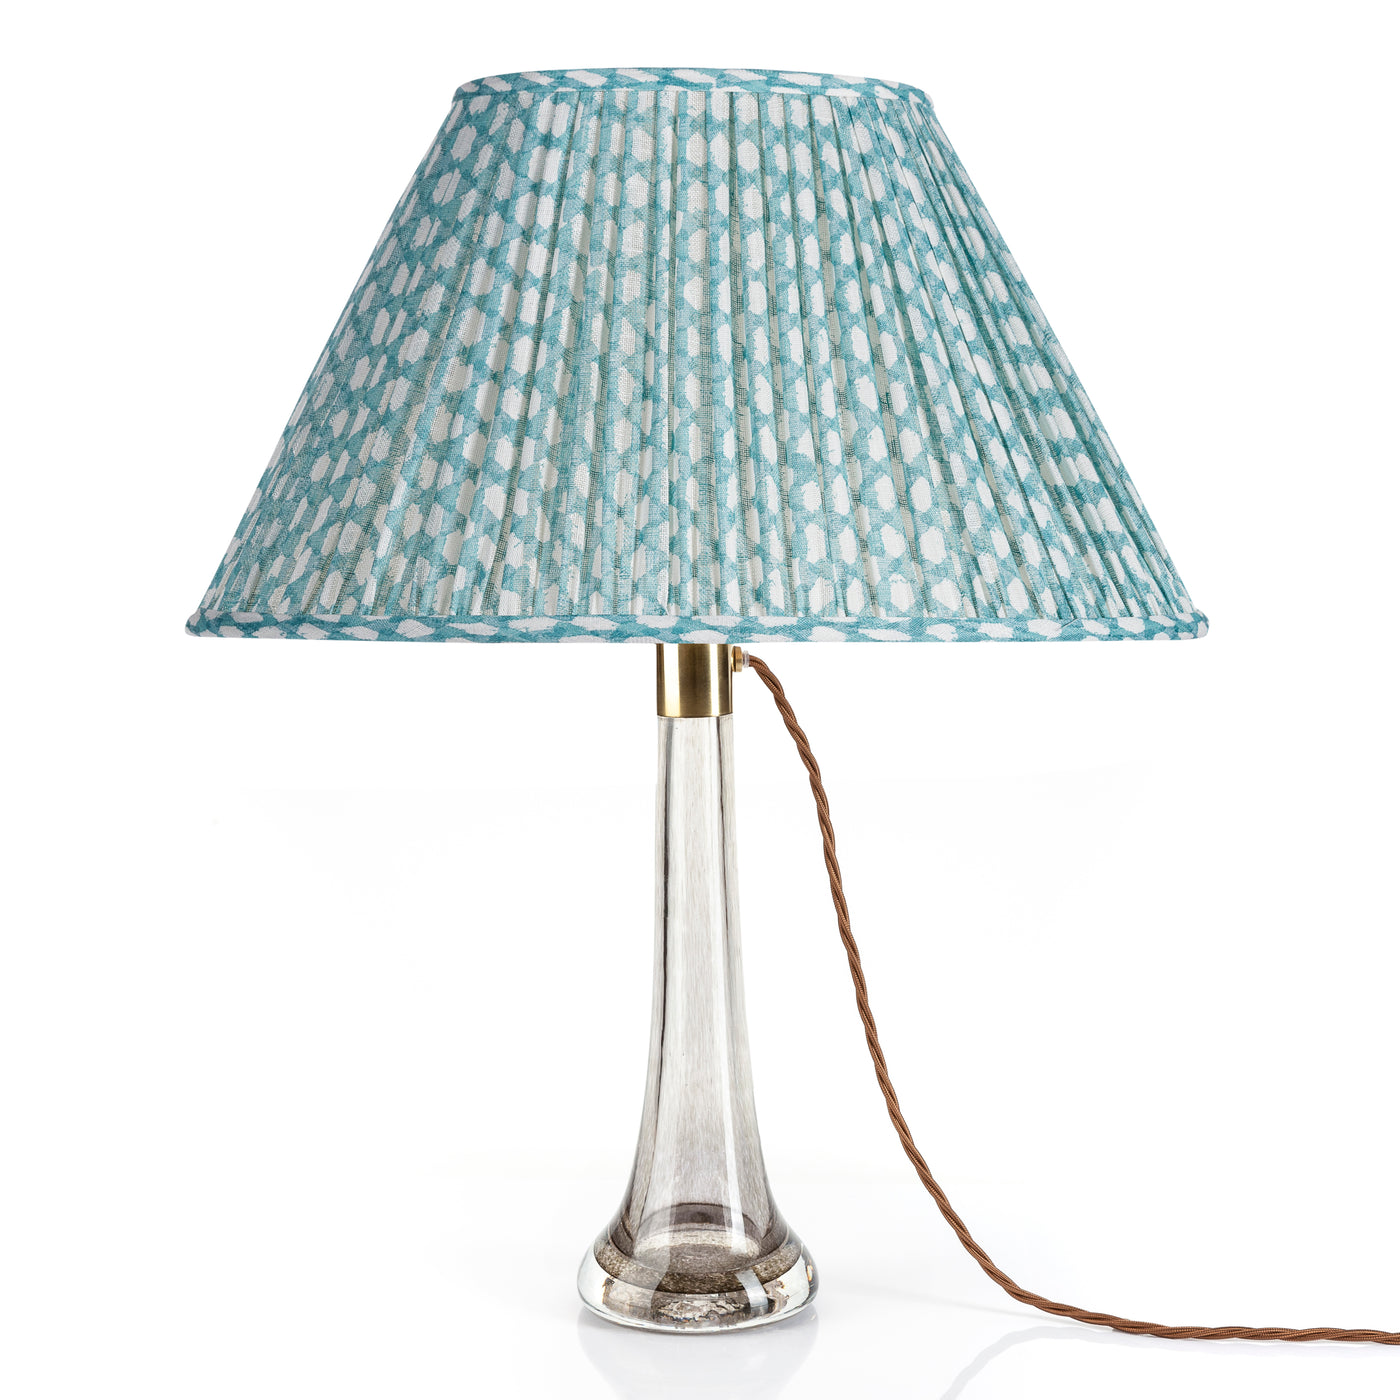 14" Oval Fermoie Lampshade - Wicker in Turquoise | Newport Lamp And Shade | Located in Newport, RI